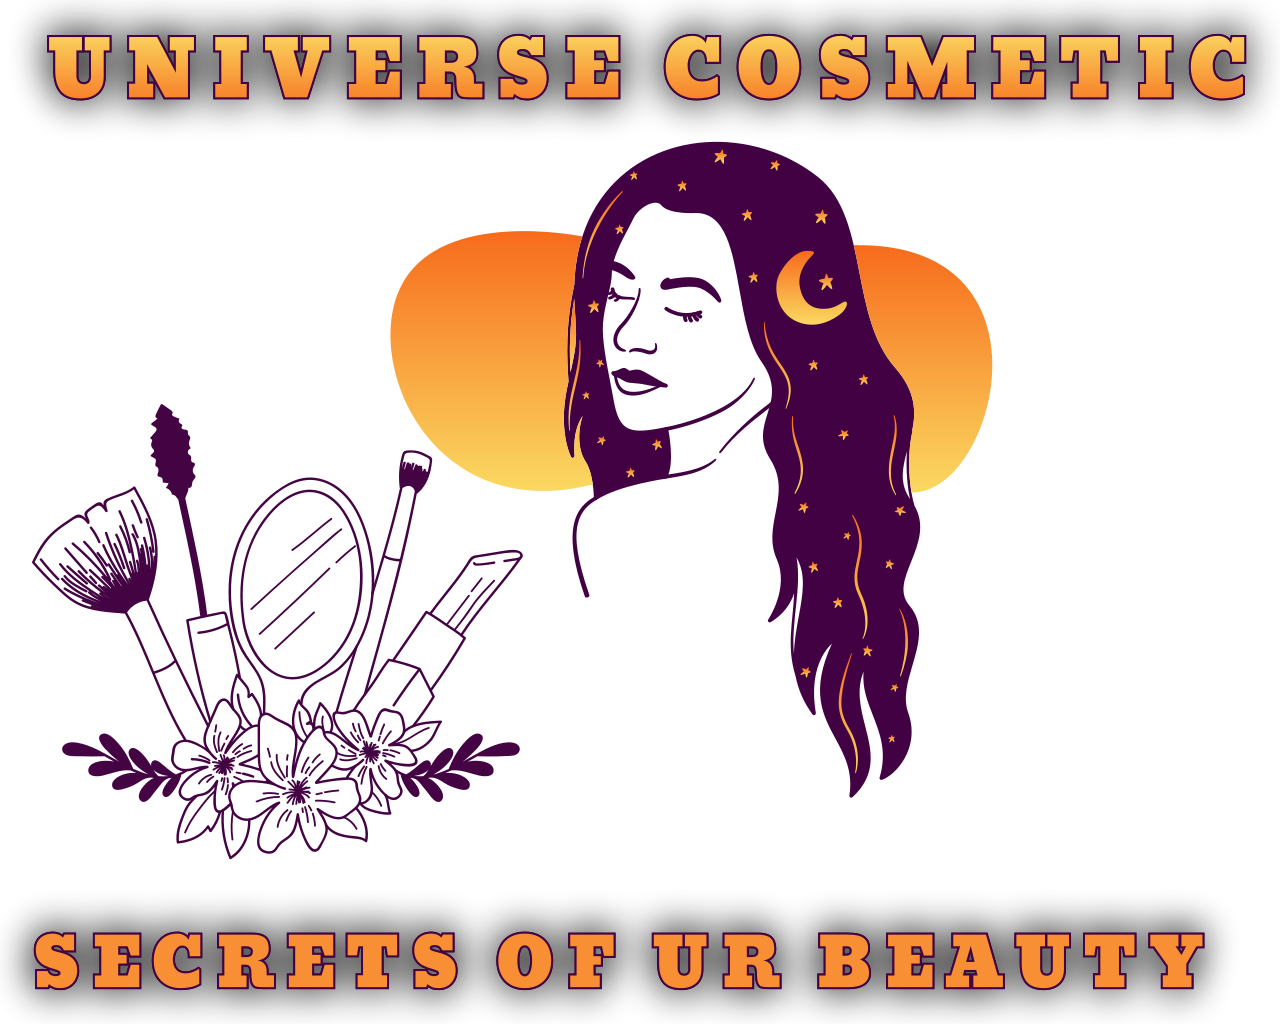 Universe Cosmetic 's web page